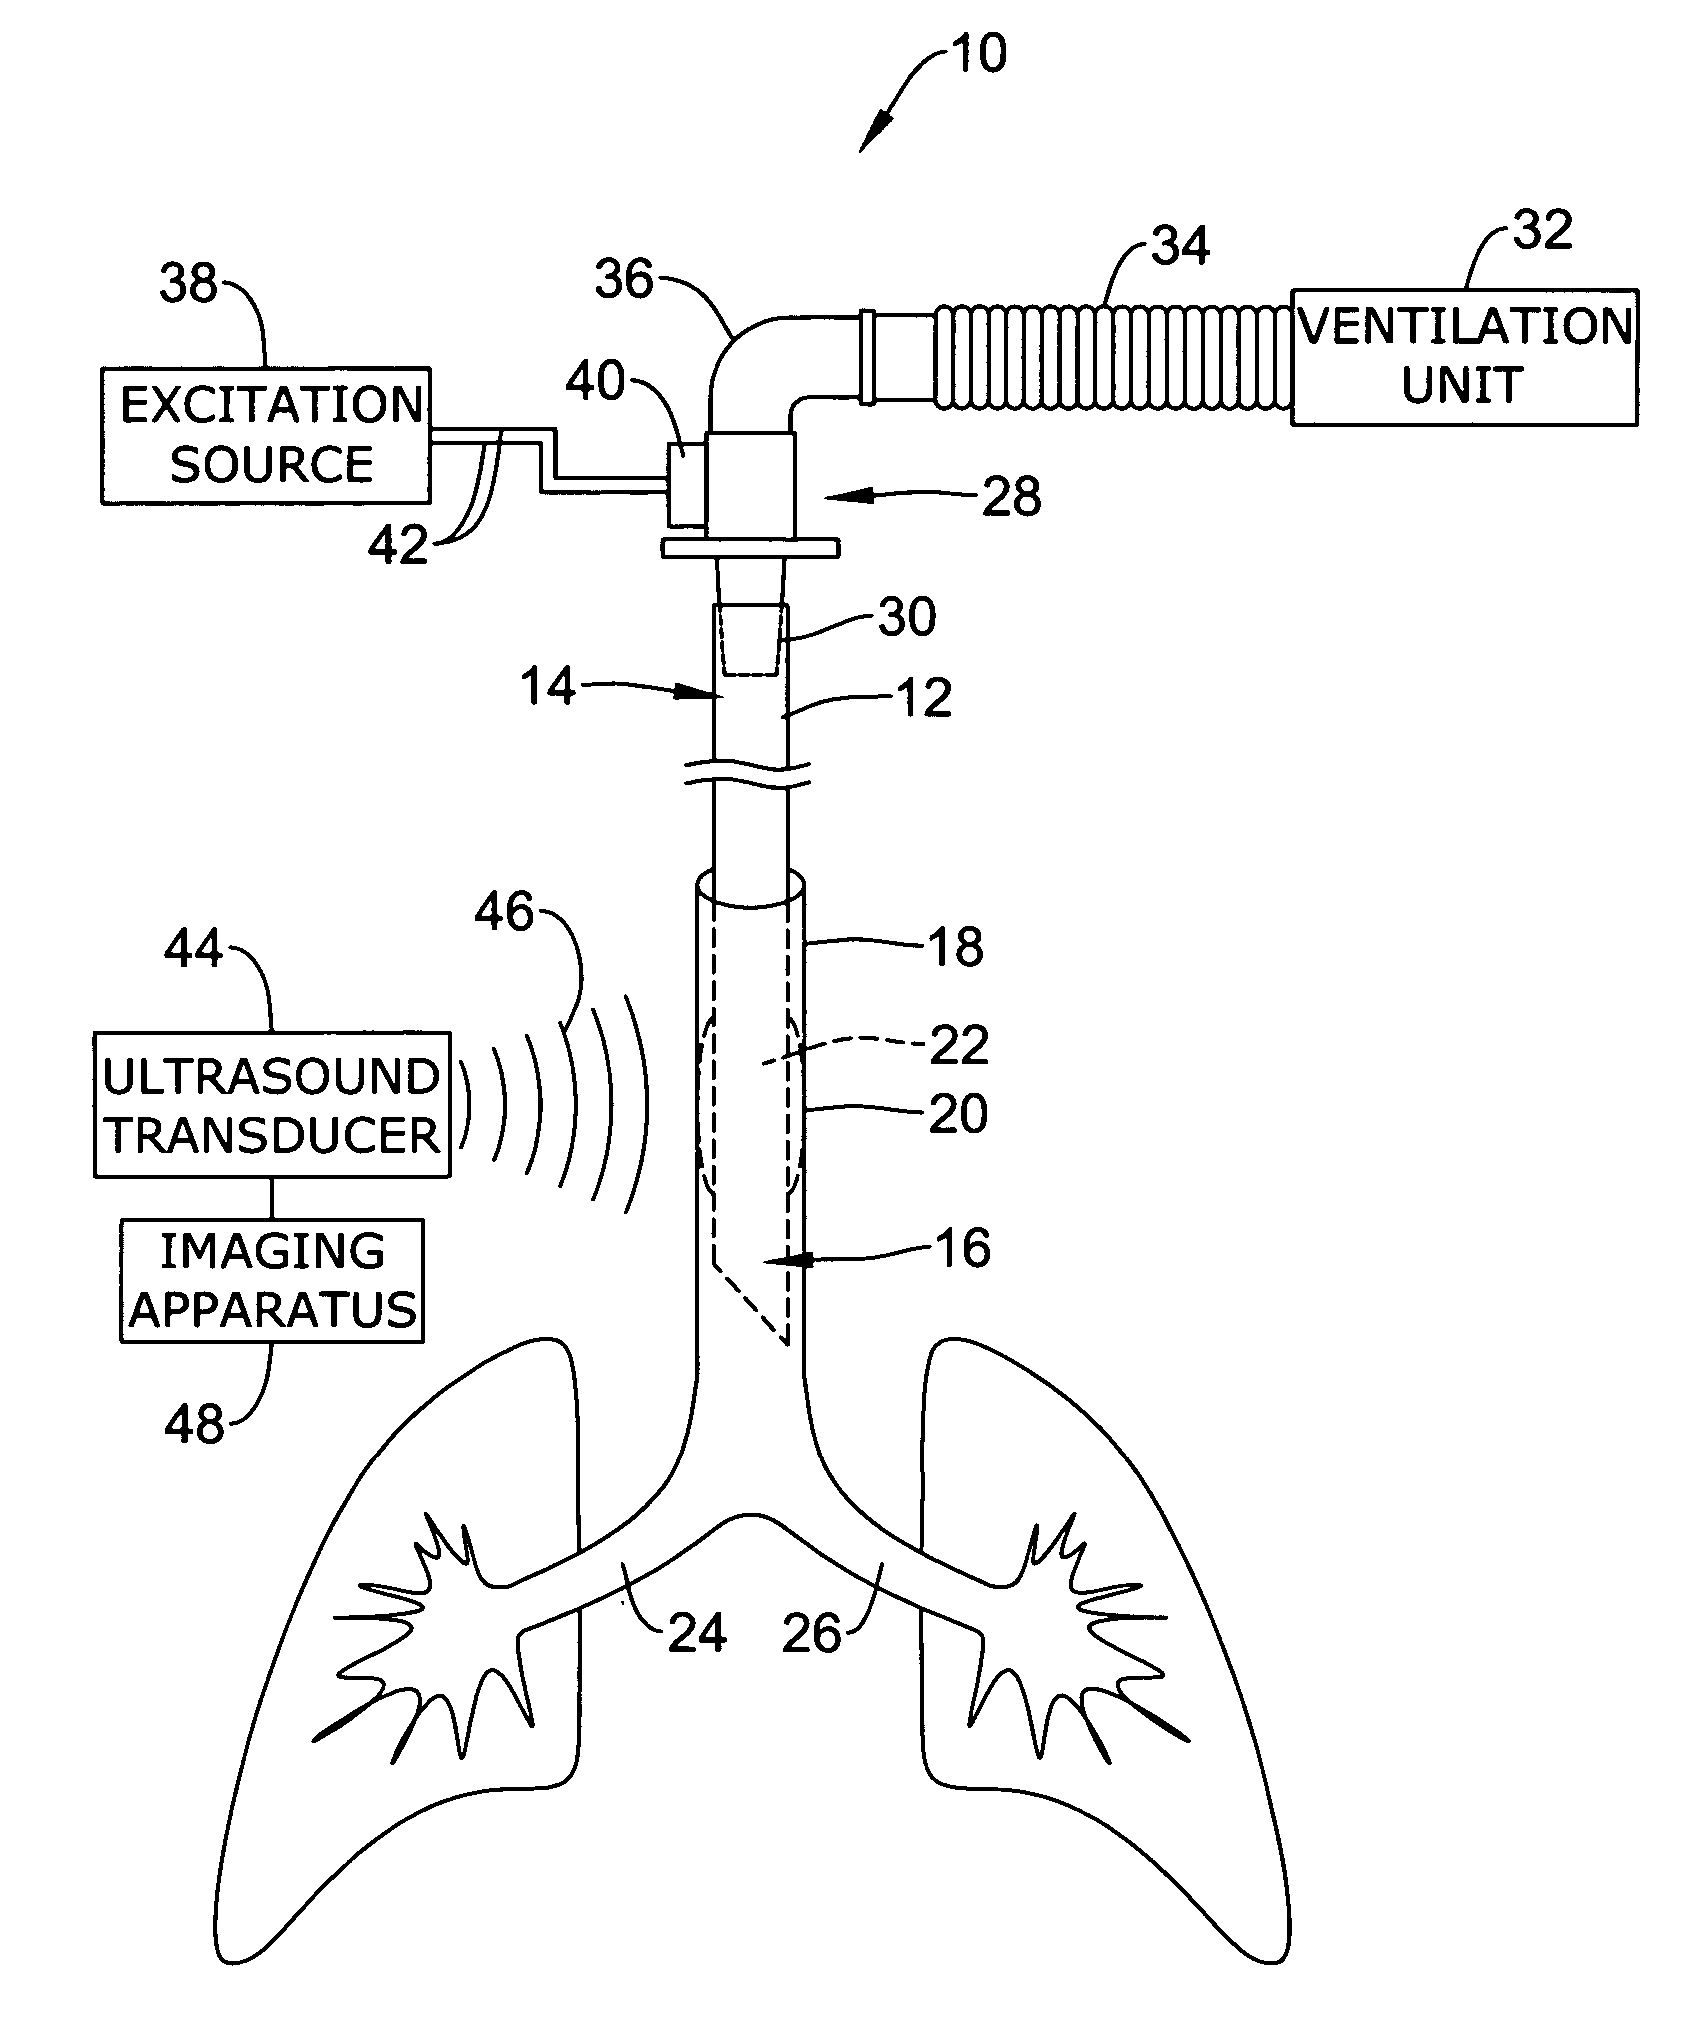 Ultrasonic placement and monitoring of an endotracheal tube